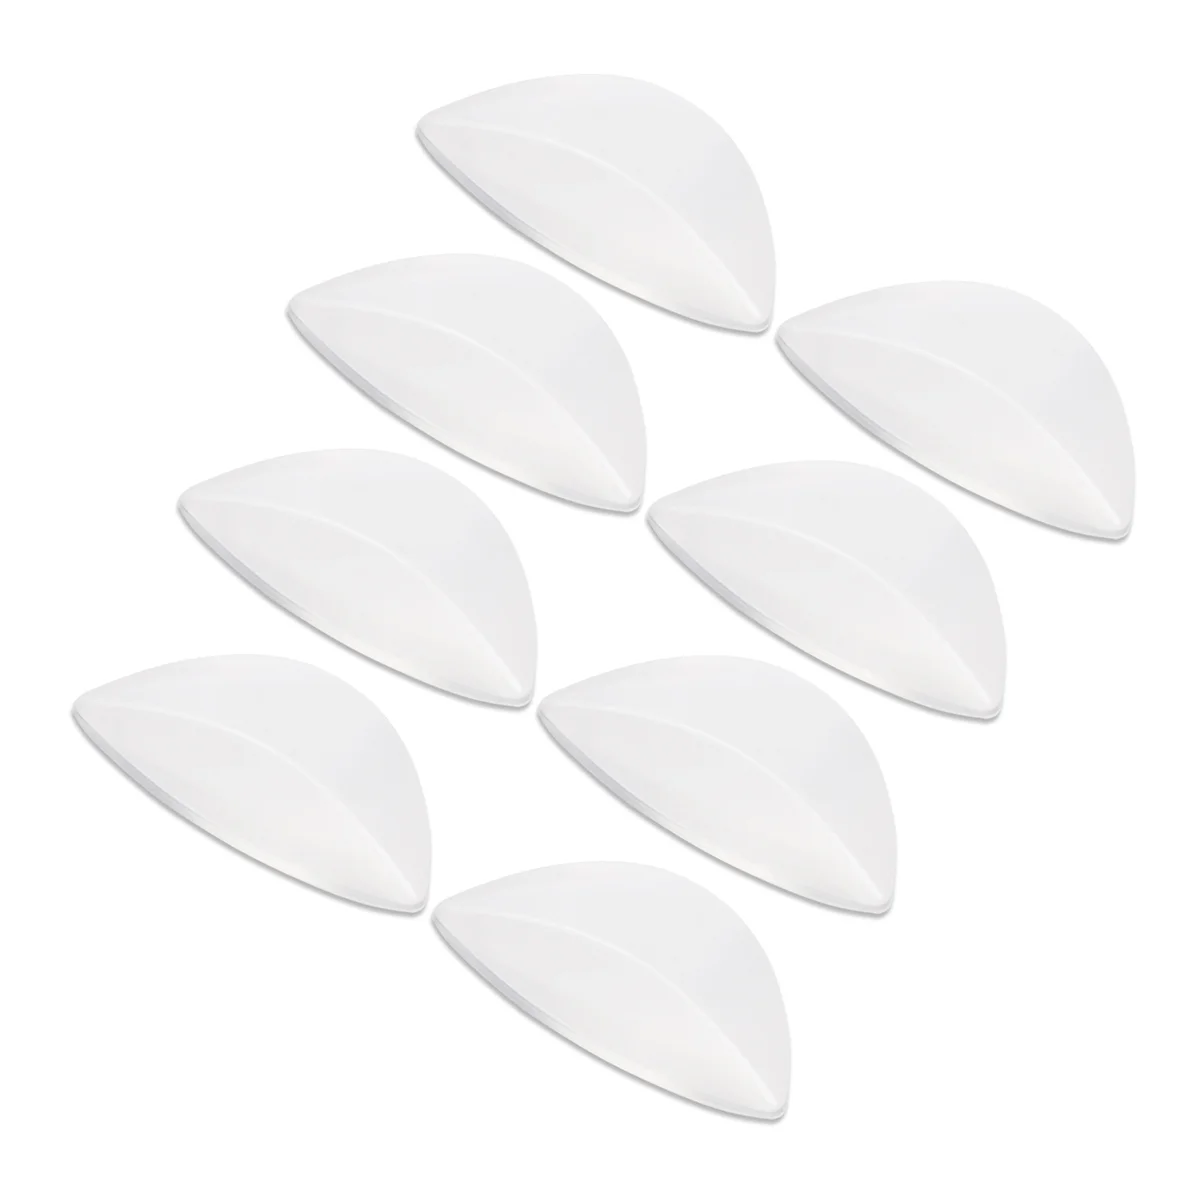 

Transparent Arch Support Cushions 4 Pairs Silicone Adhesive Arch Insole for Flat Feet Relieve Pressure Feet Pain